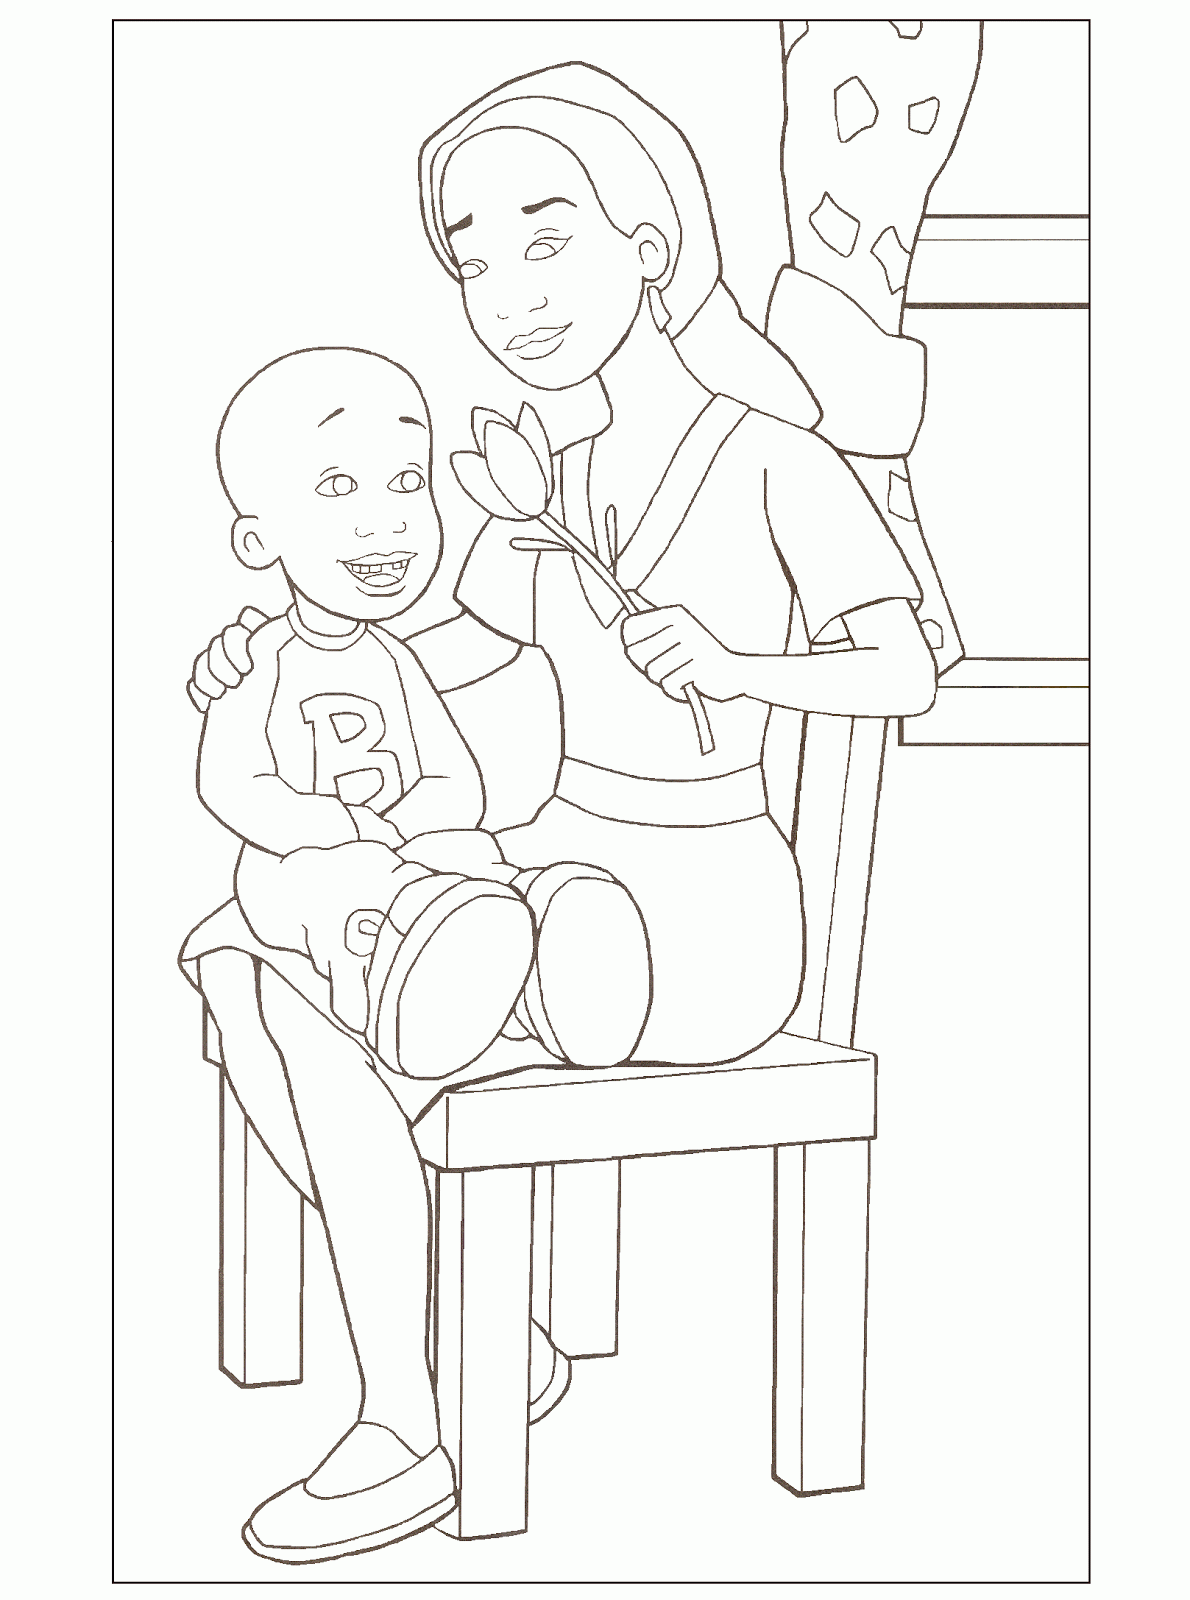 Little Bill Coloring Pages - Coloring Home